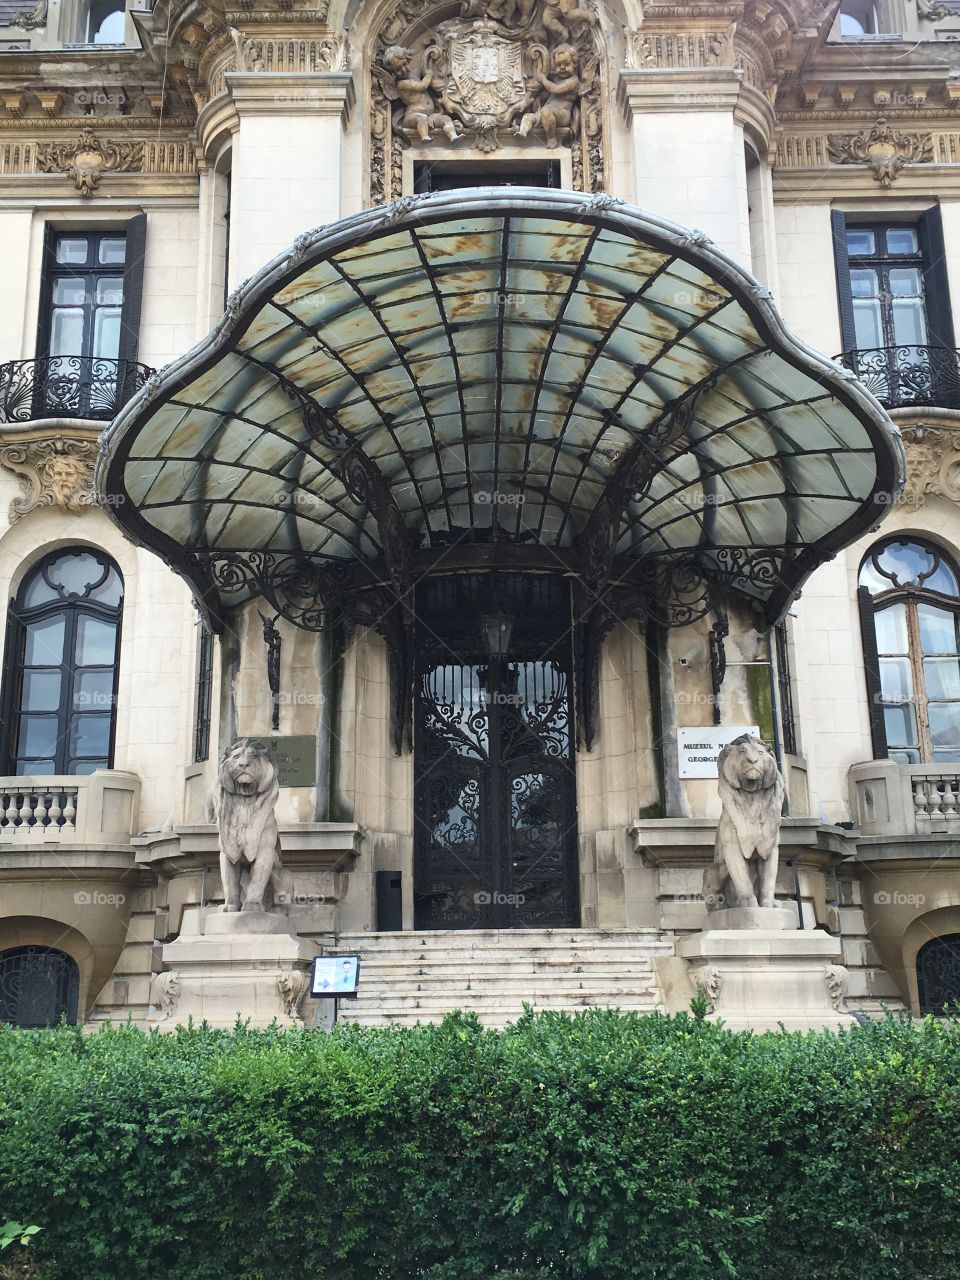 Sumptuous entrance of the Cantacuzino Palace, seat of The National Museum "George Enescu", one of the most beautiful buildings in Bucharest